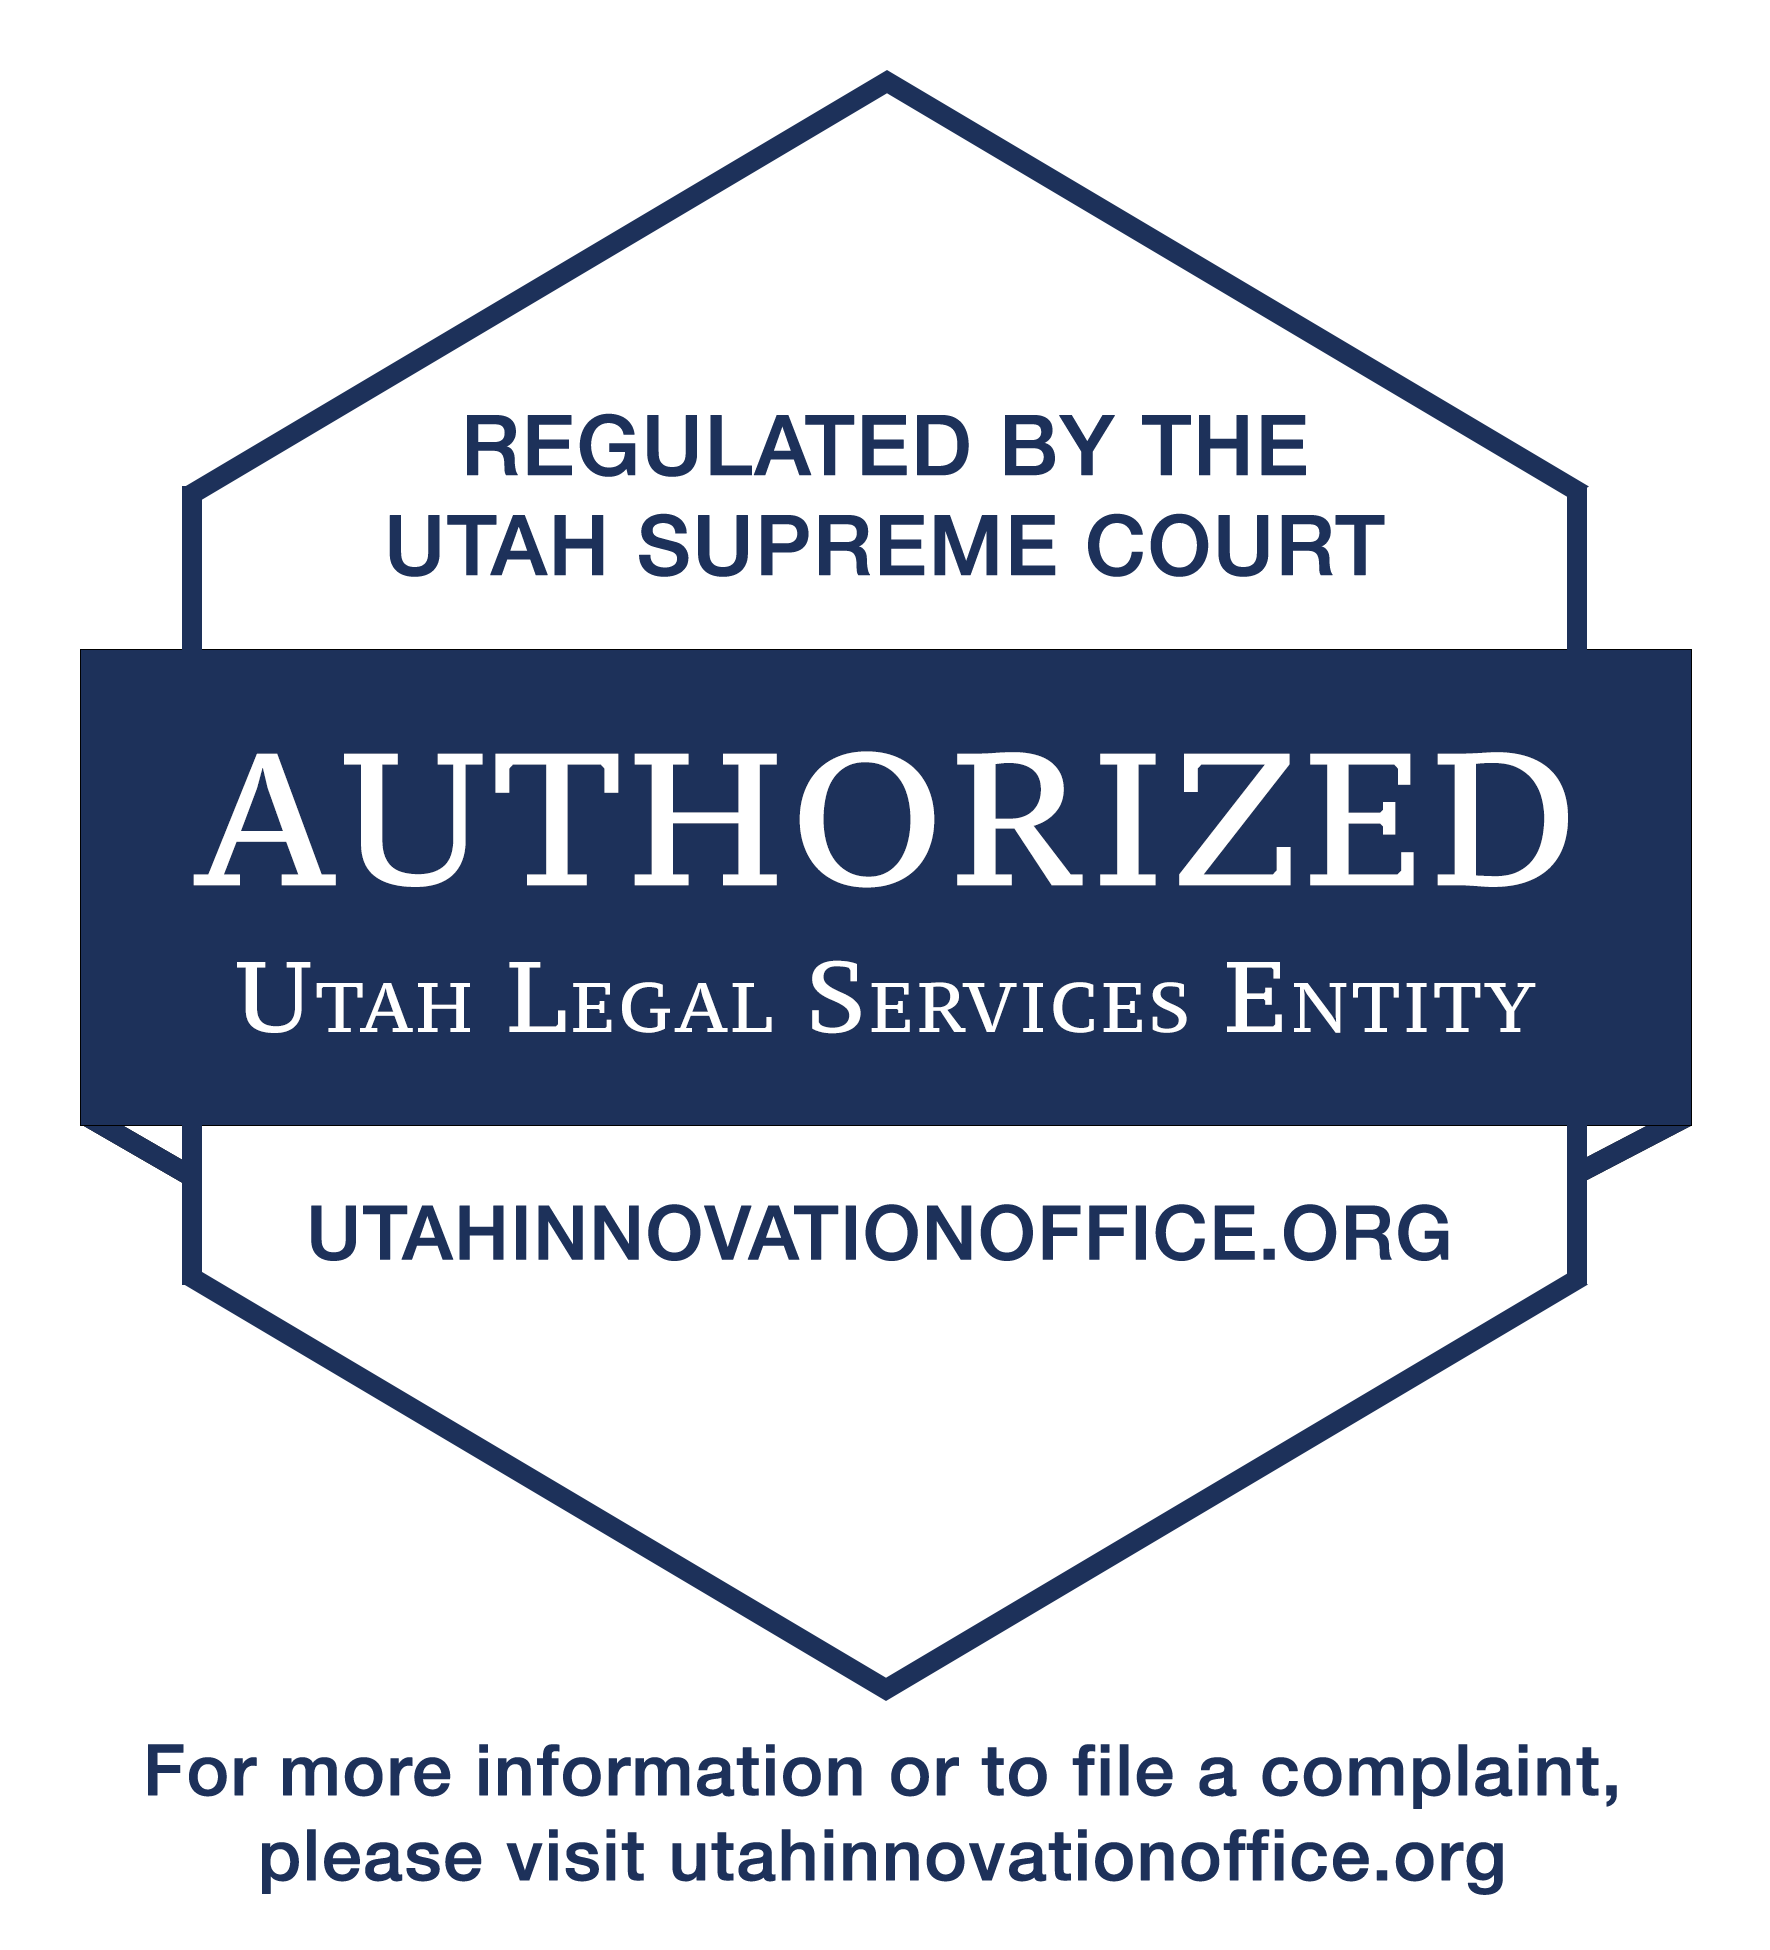 Blue six-sided badge with the words “Regulated by the Utah Supreme Court, AUTHORIZED Utah Legal Services Entity, utahinnovationoffice.org”